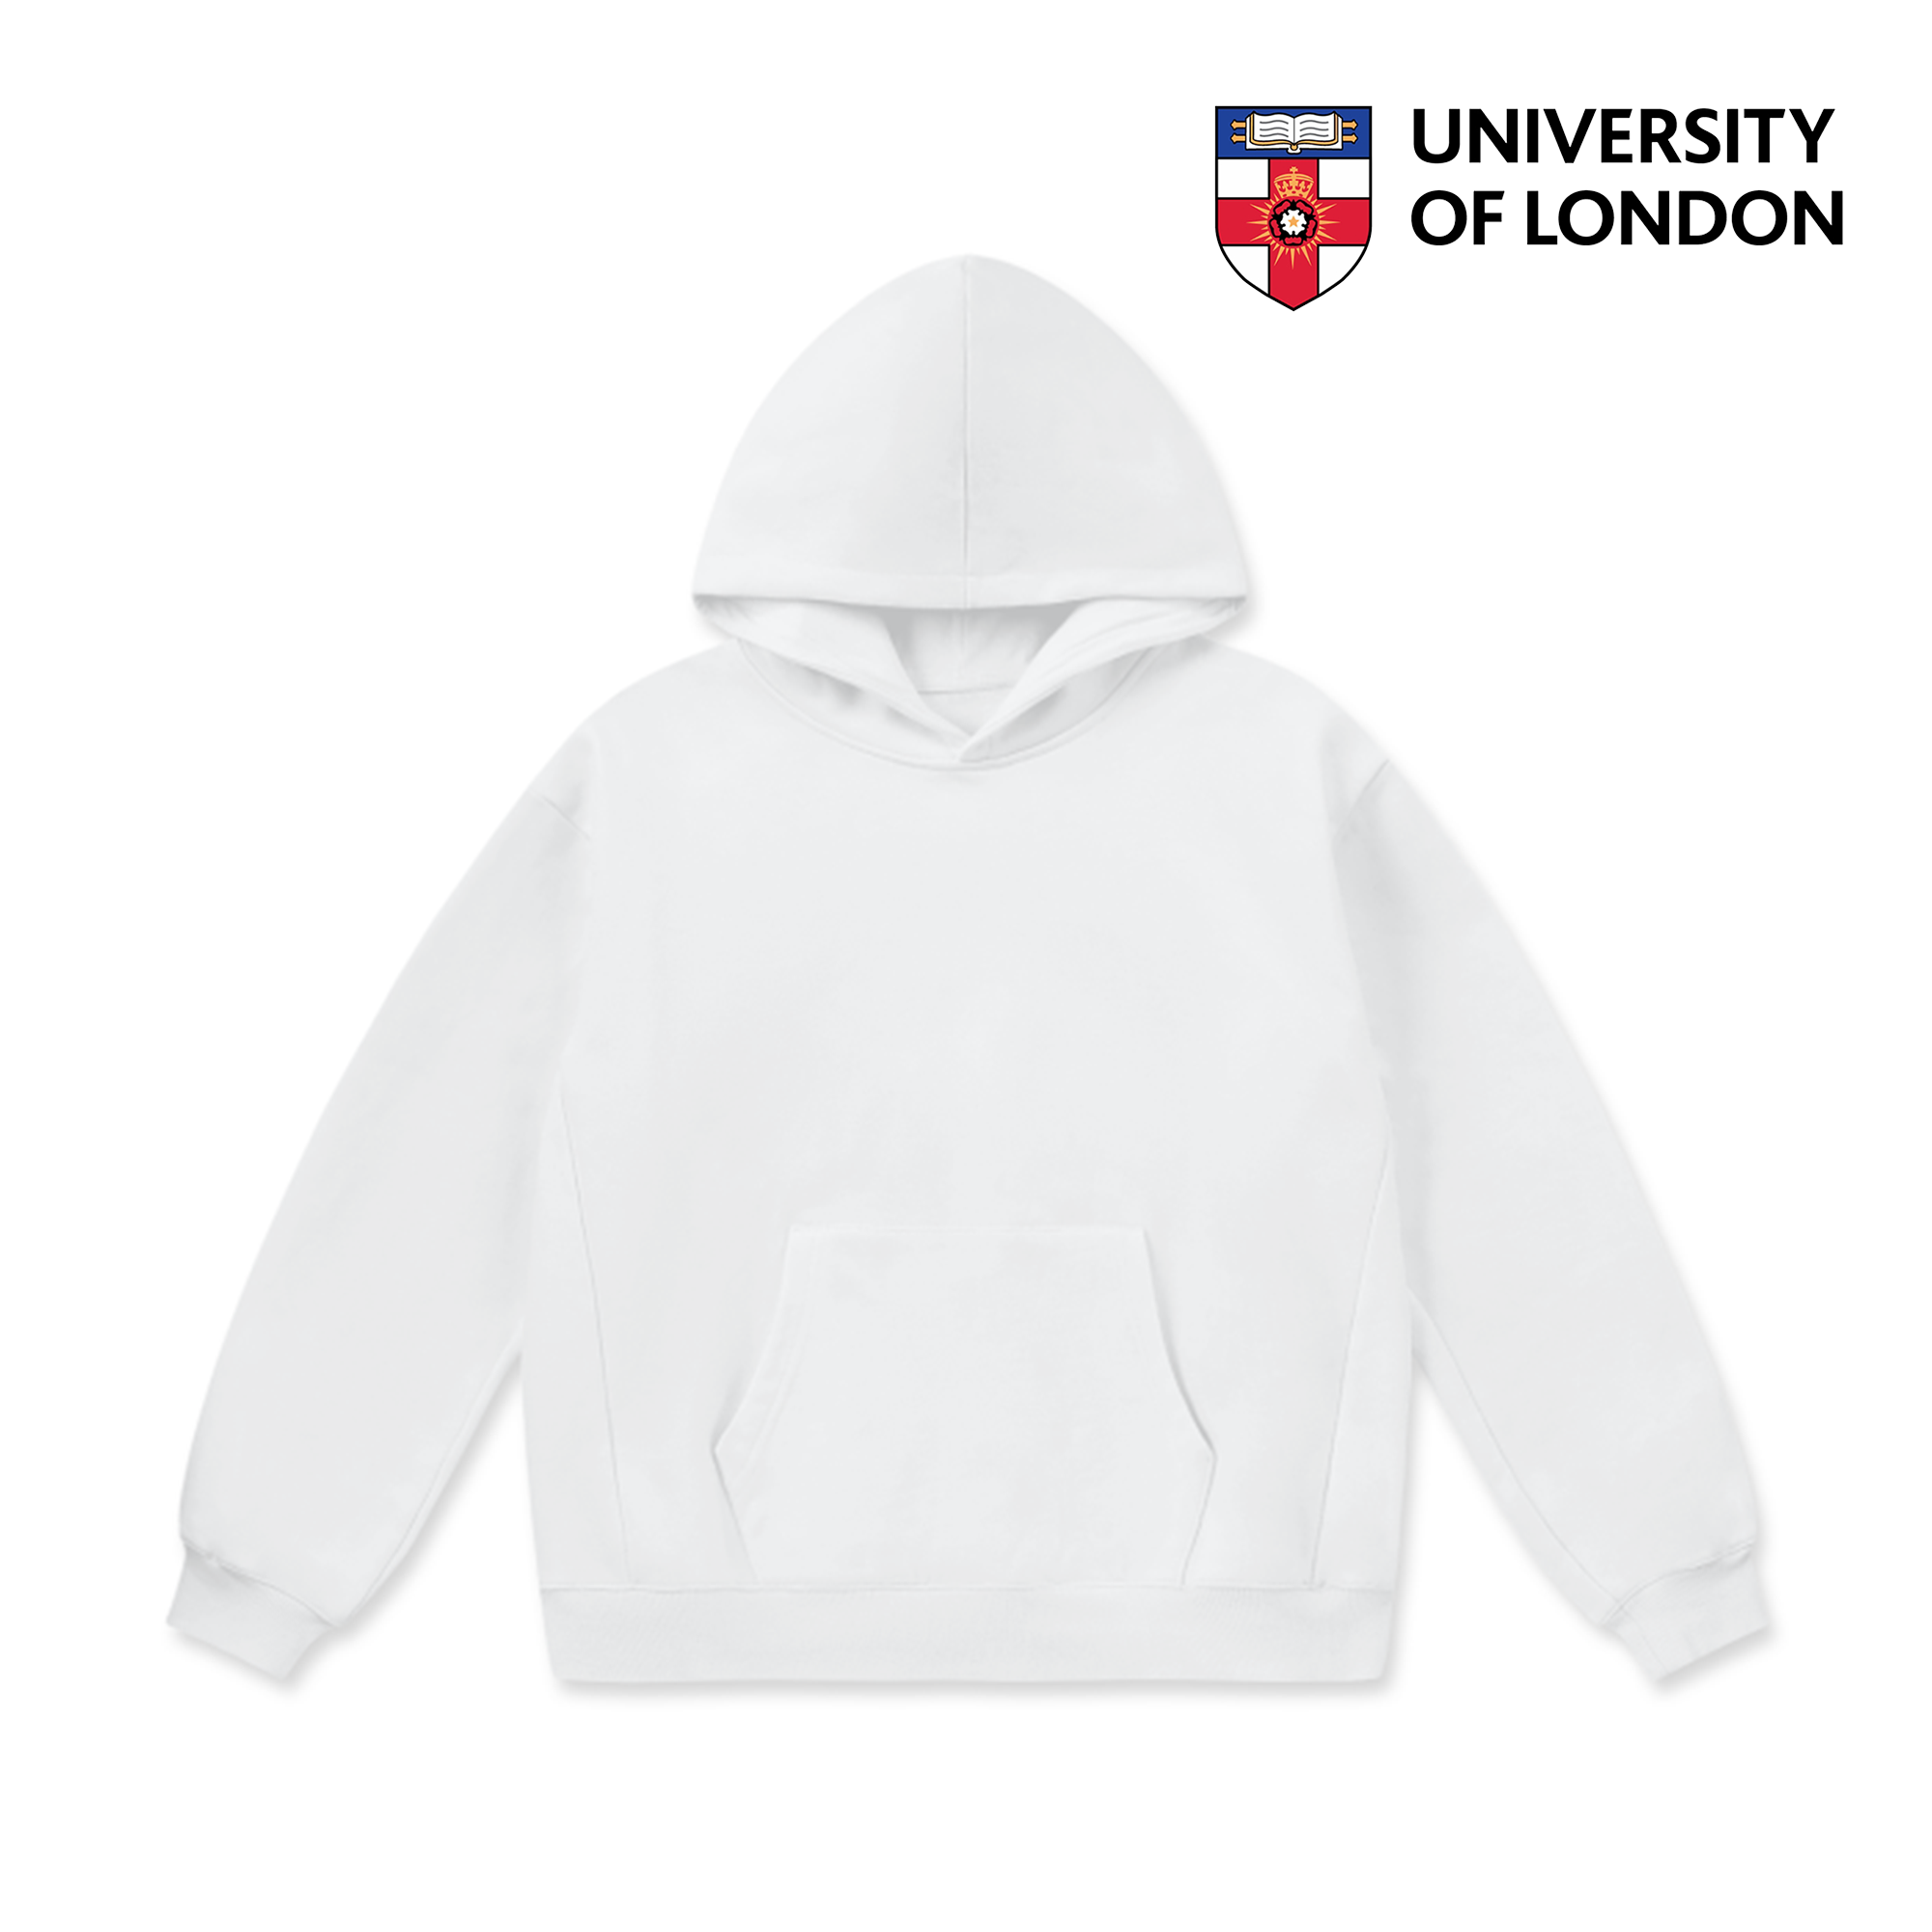 LCC Super Weighted Hoodie - University of London (Full Logo)